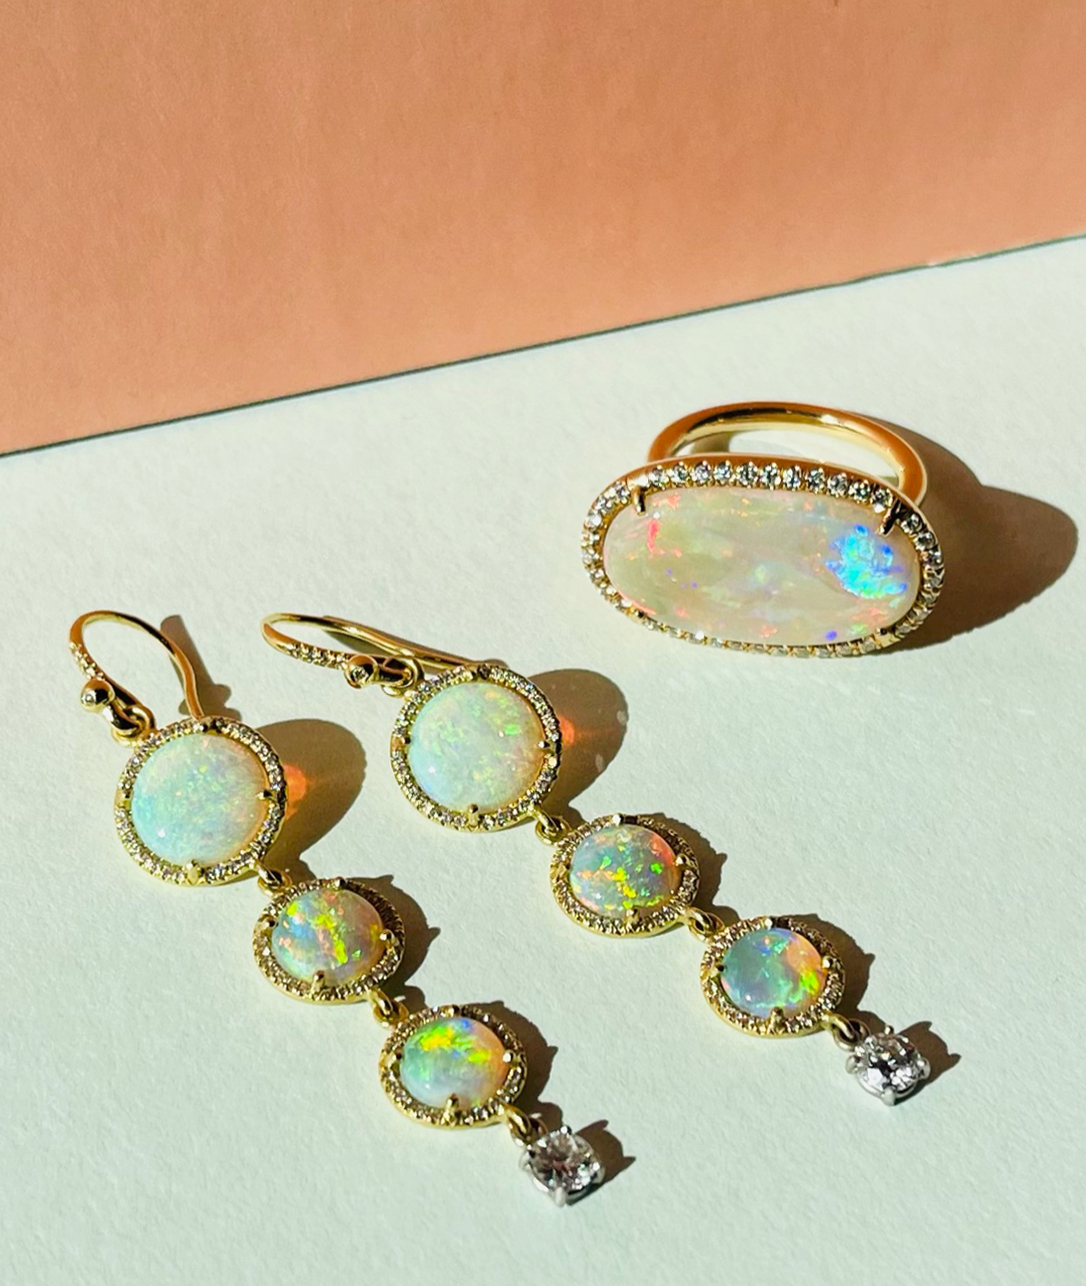 Gemstones in spectacular color combinations and cuts come together to tell a love story all their own.